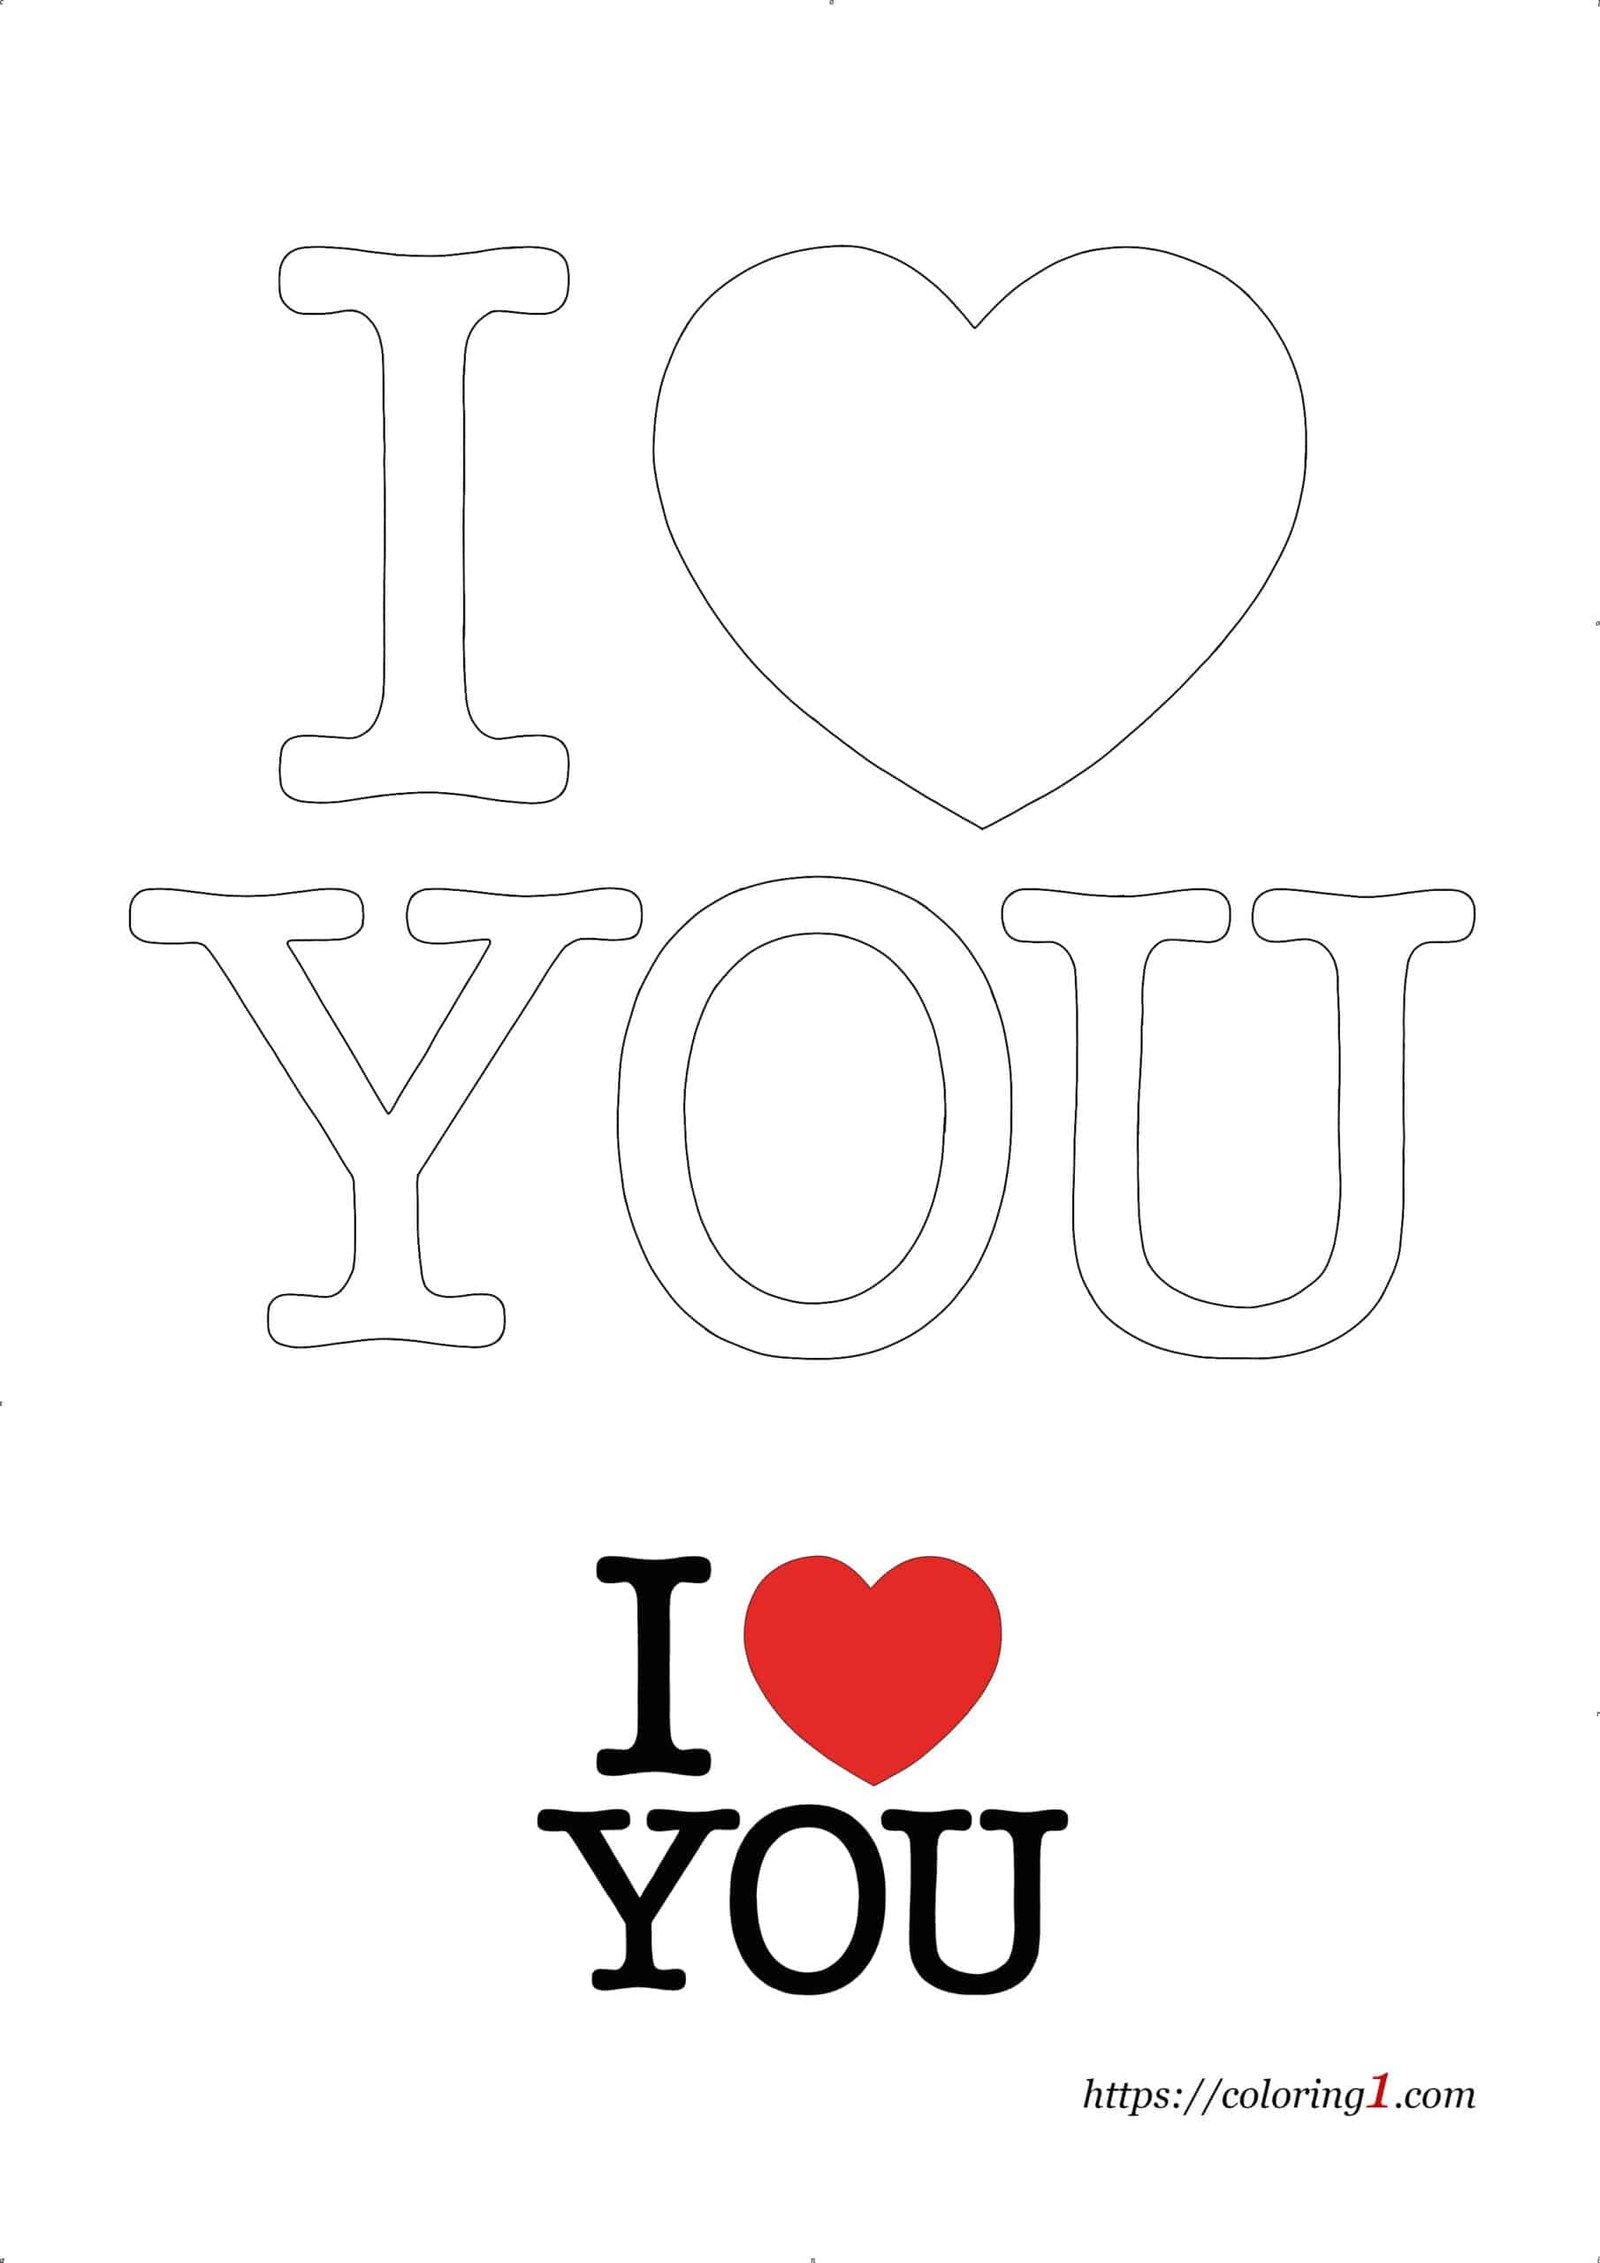 I Heart You easy coloring page to print